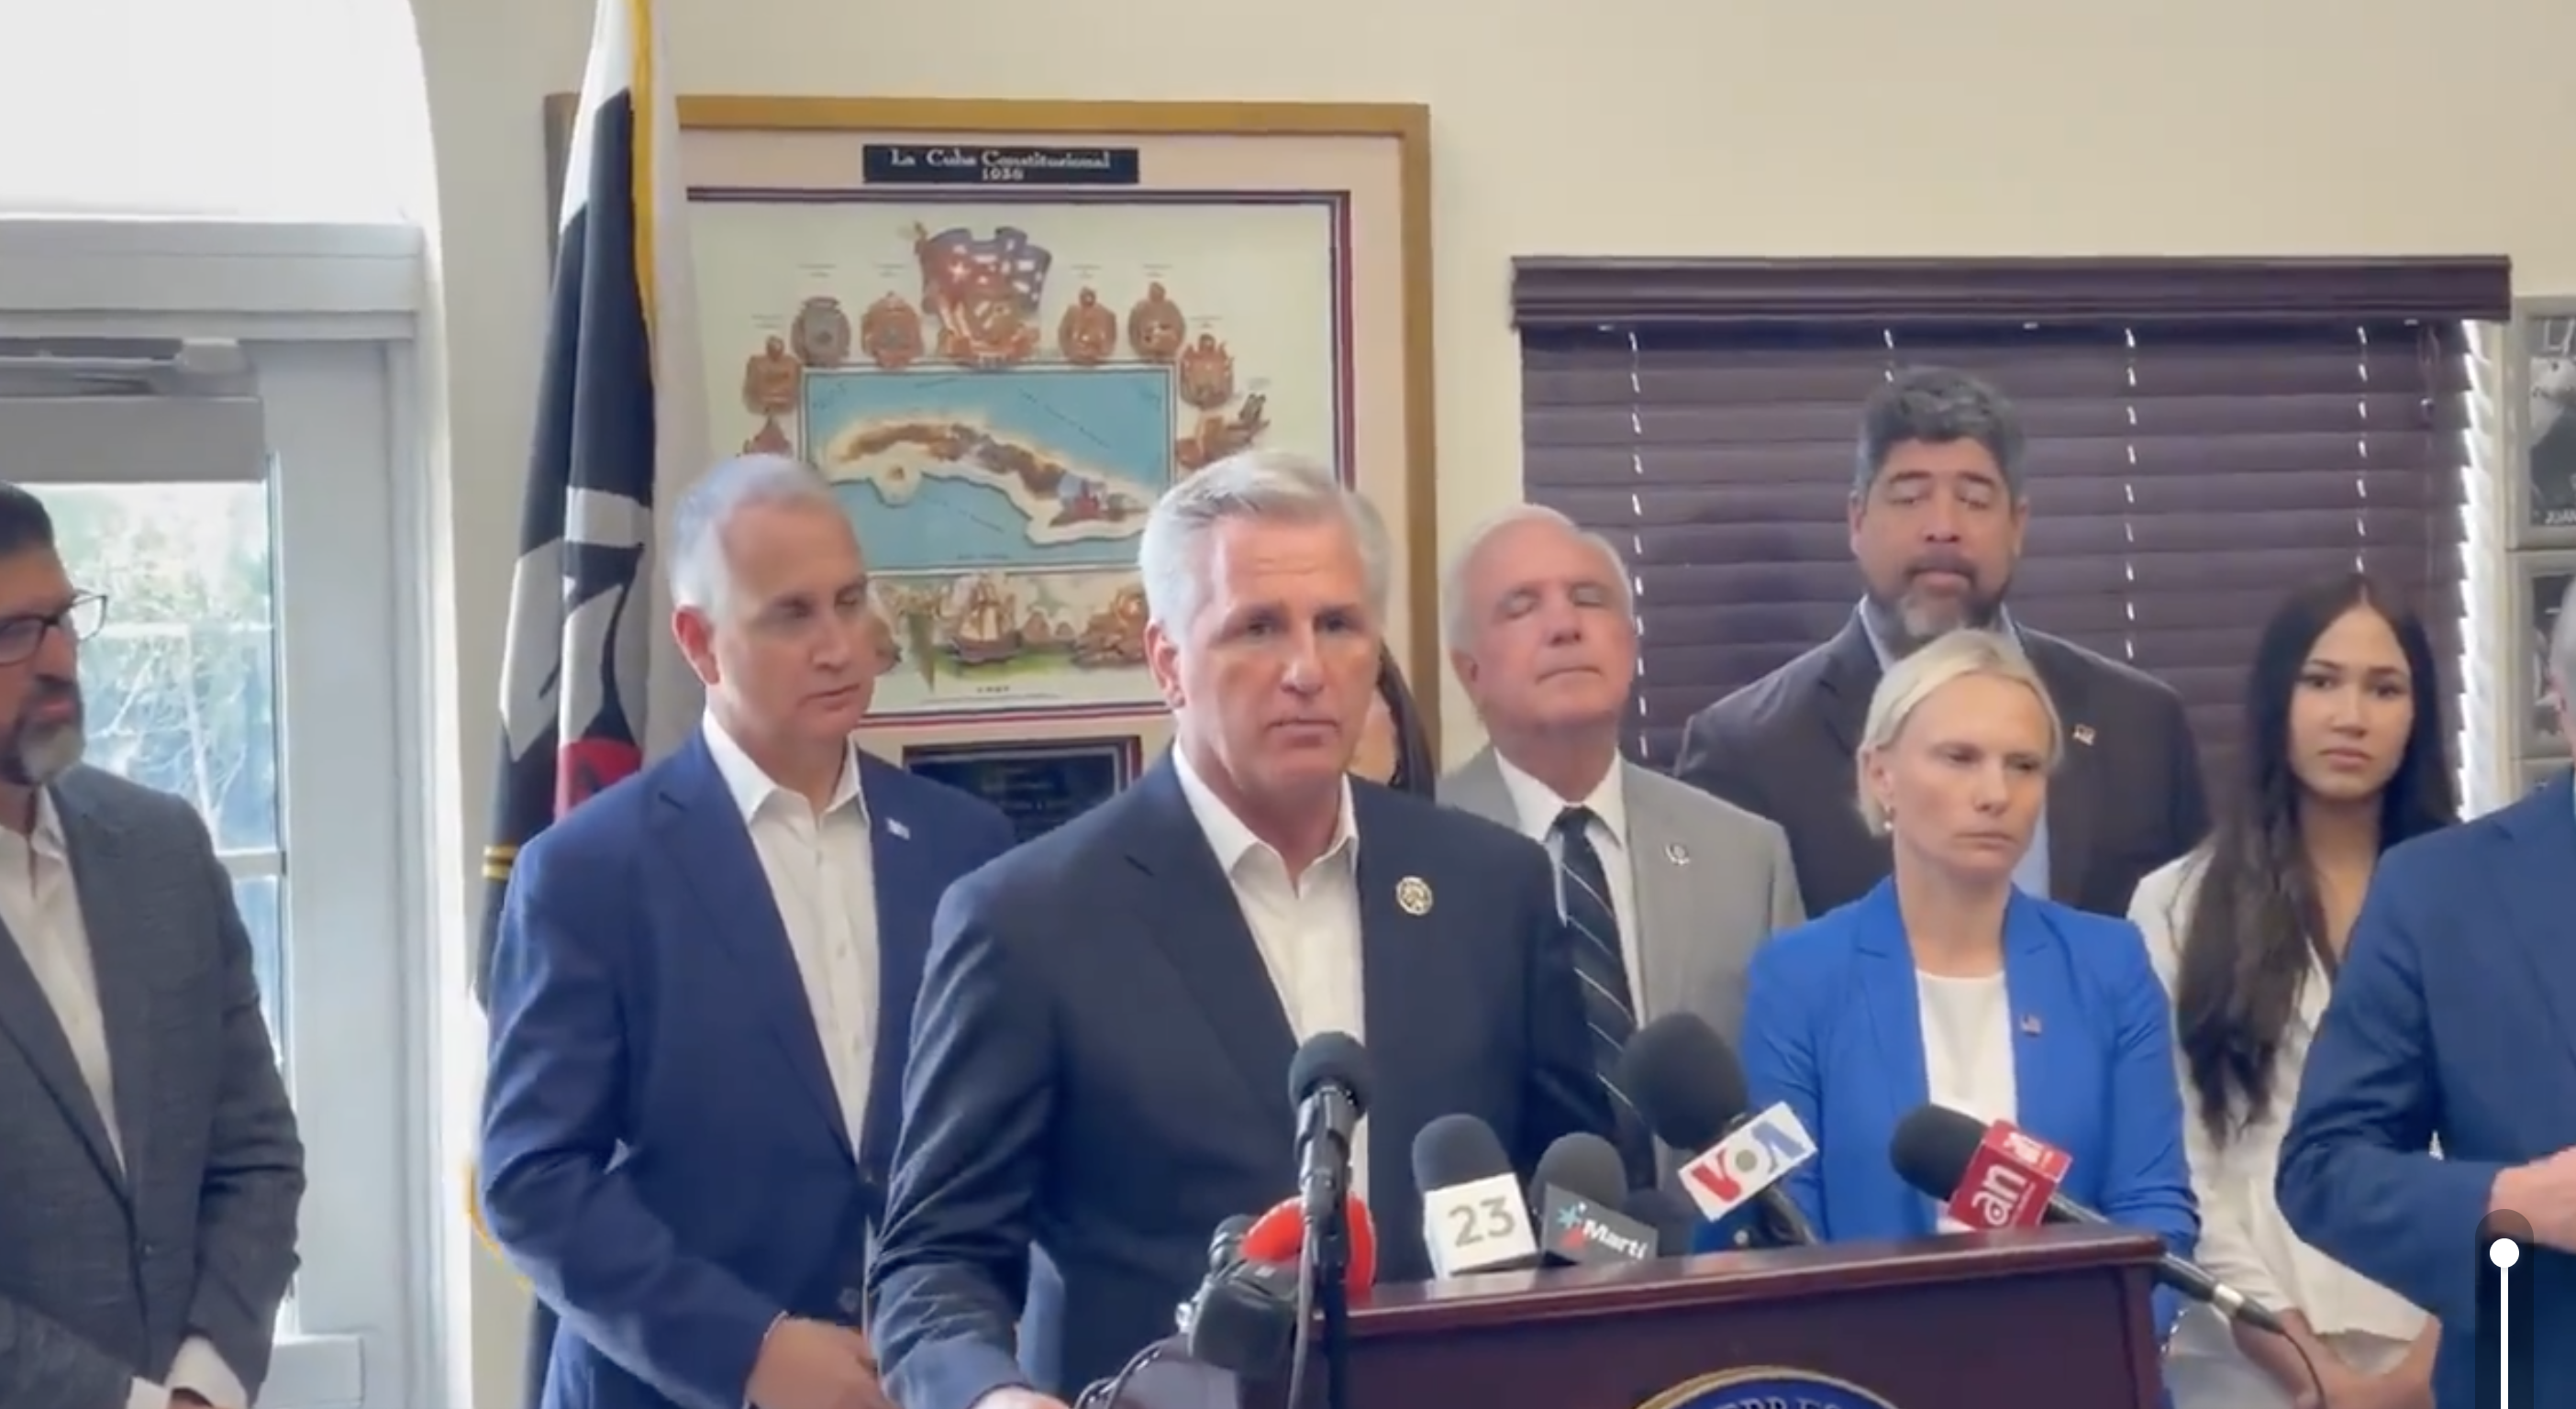 Kevin McCarthy acts like Fidel Castro as Miami-Dade electeds look away